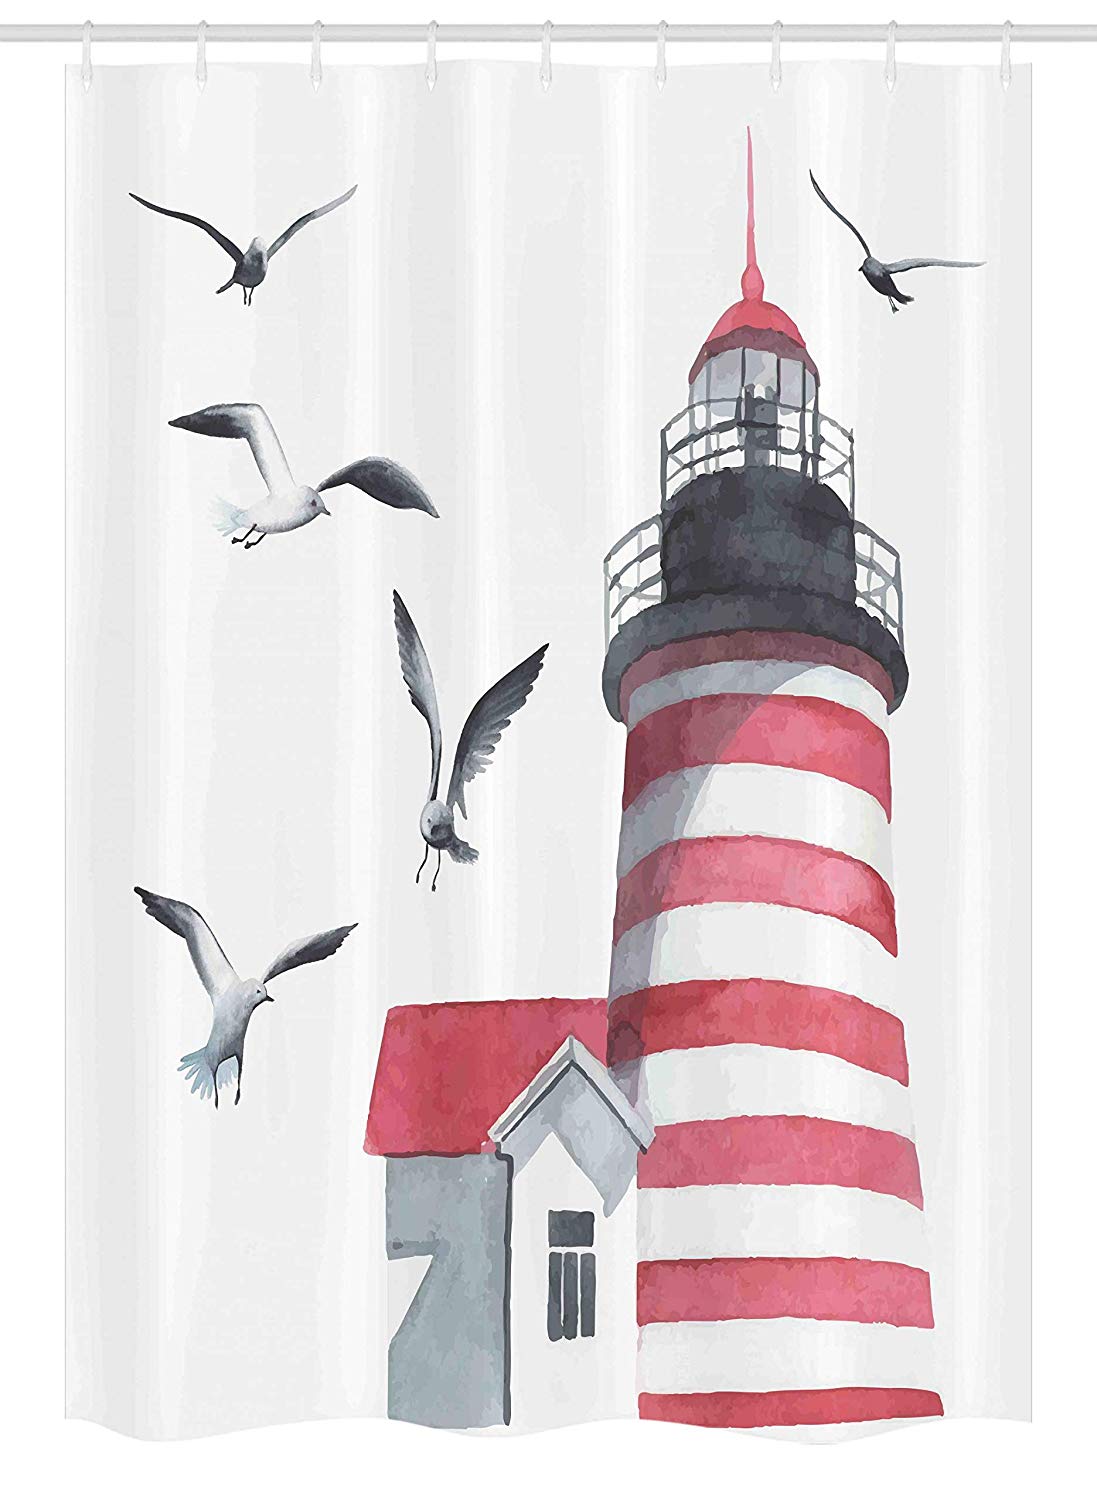 Ambesonne Lighthouse Stall Shower Curtain, Lighthouse and Seagulls on The Beach Navigational Aid Seaside Waterways Art, Fabric Bathroom Decor Set with Hooks, 54 W x 78 L Inches, Red Grey White